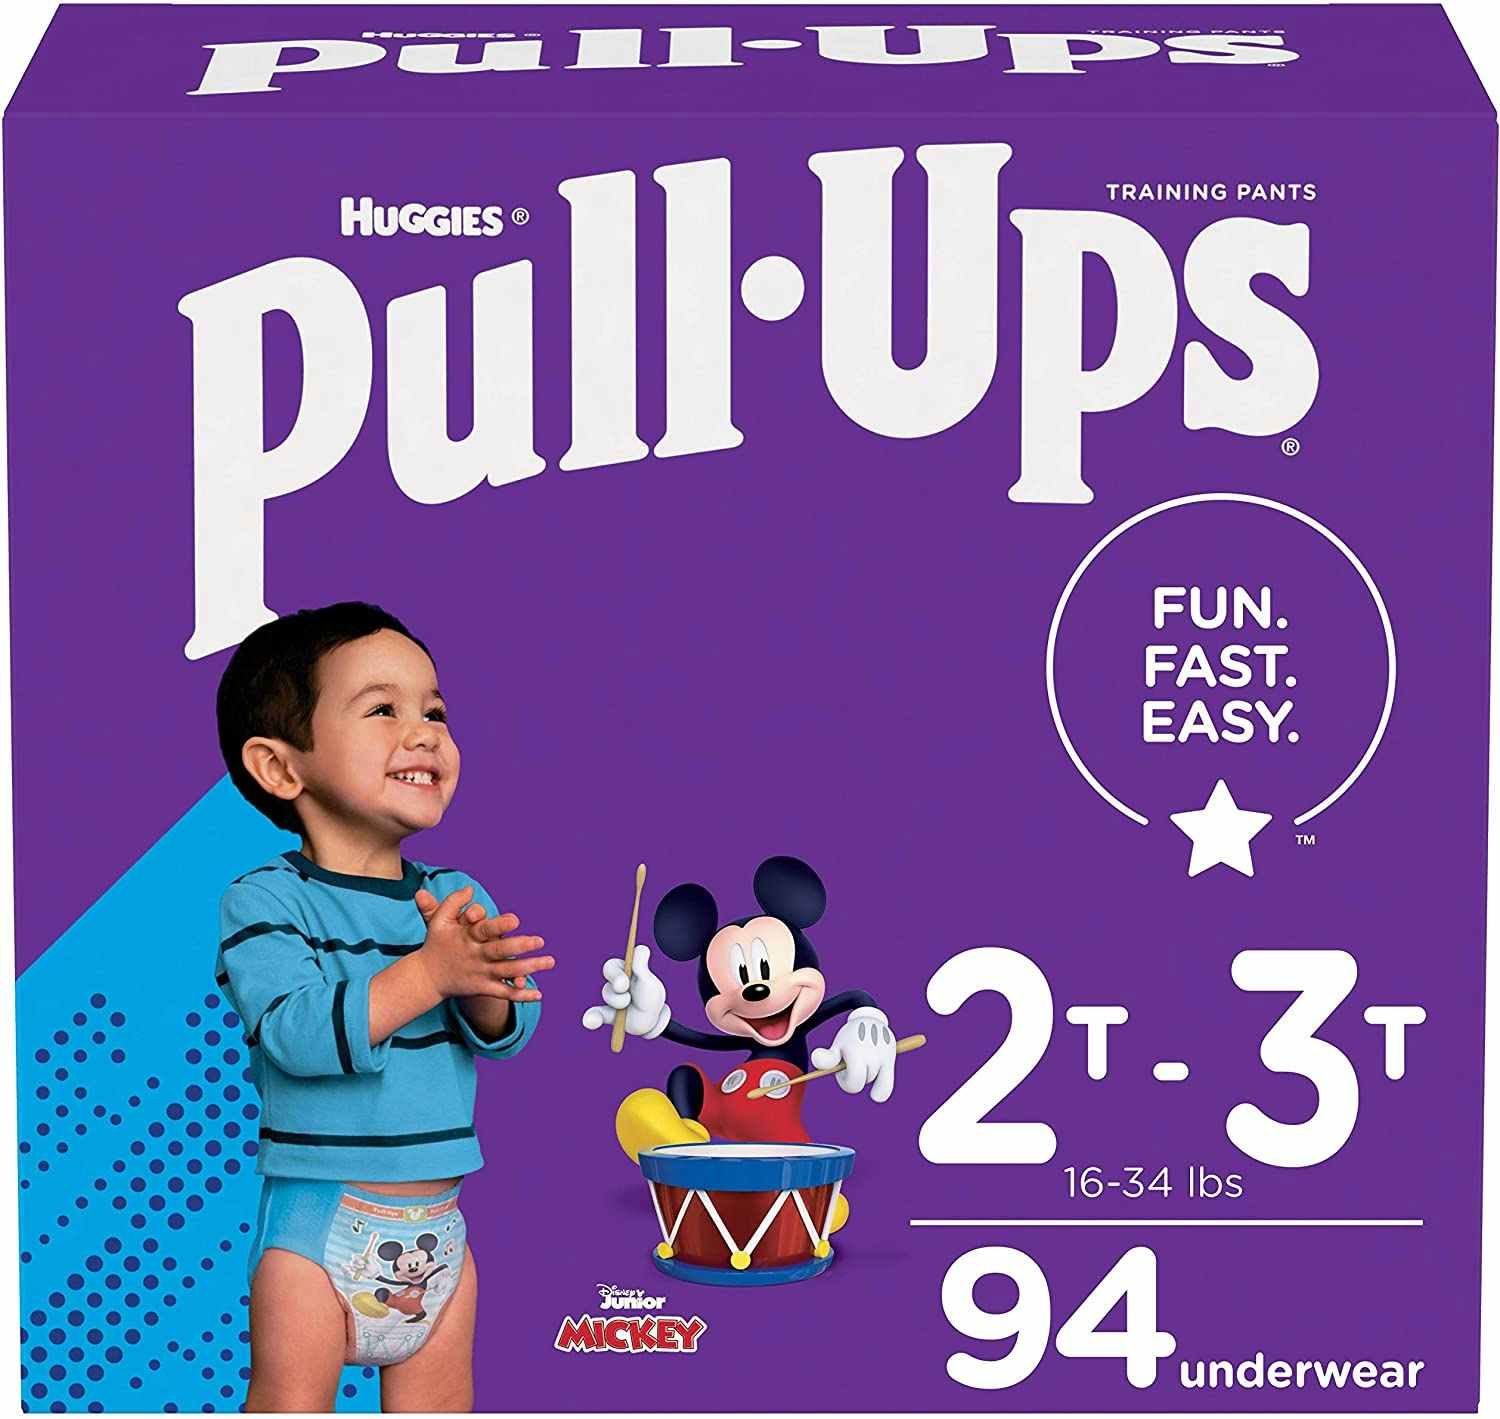 A package of Huggies Pull-Ups diapers.